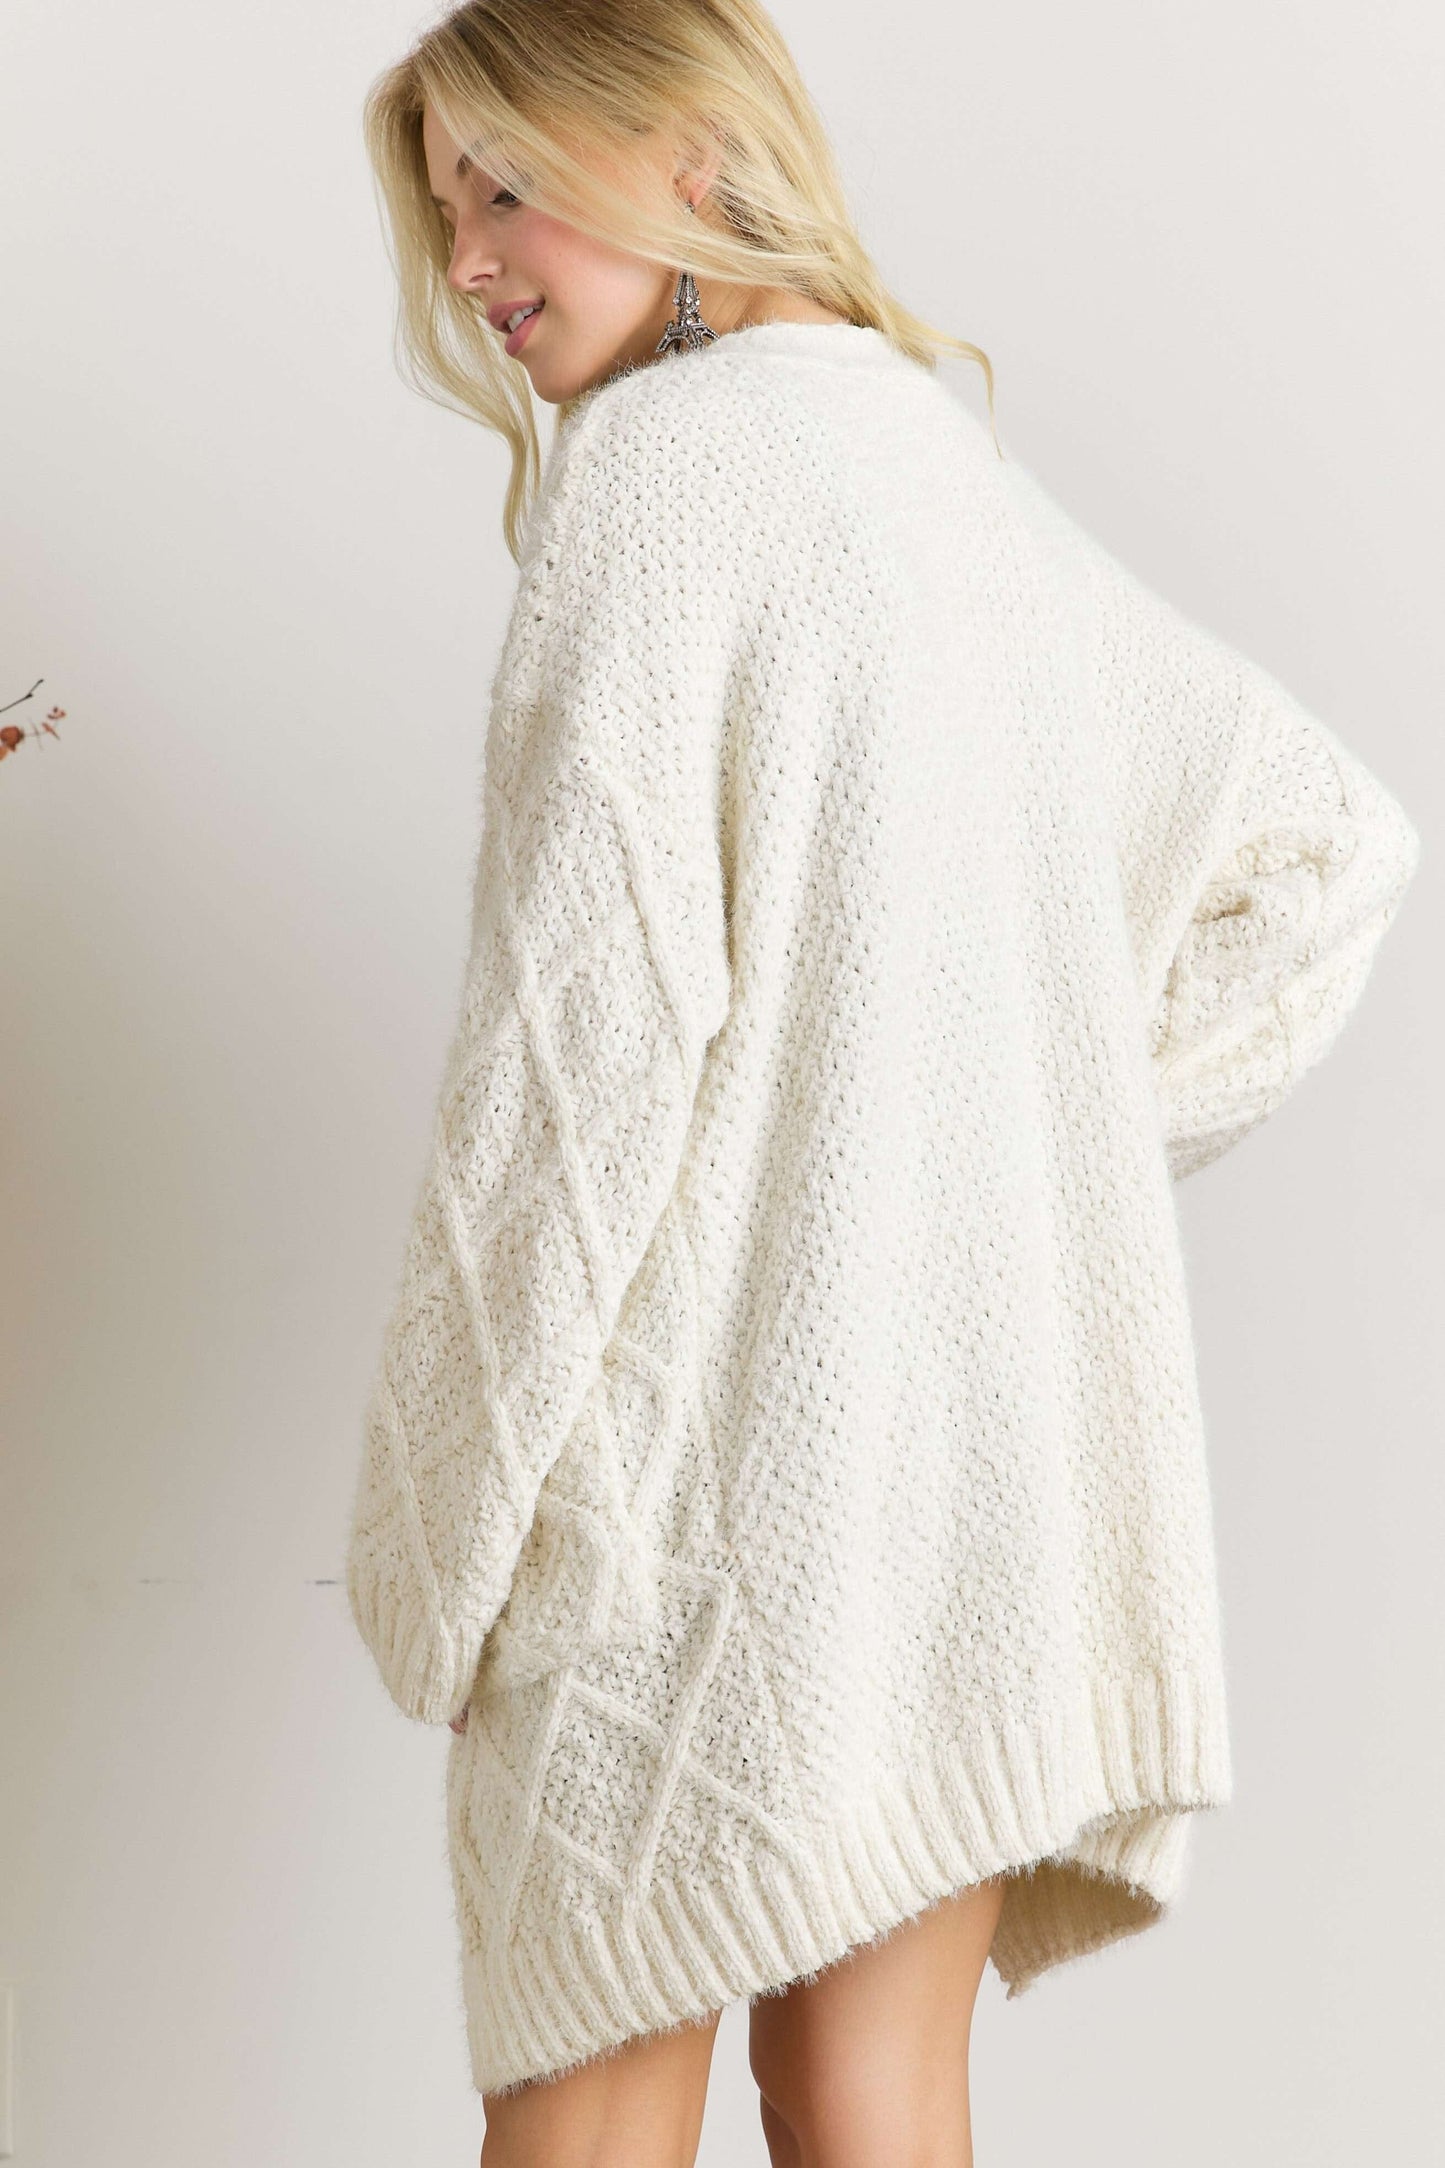 Irresistible Ivory Chunky Knit Cardigan – Poet Street Boutique